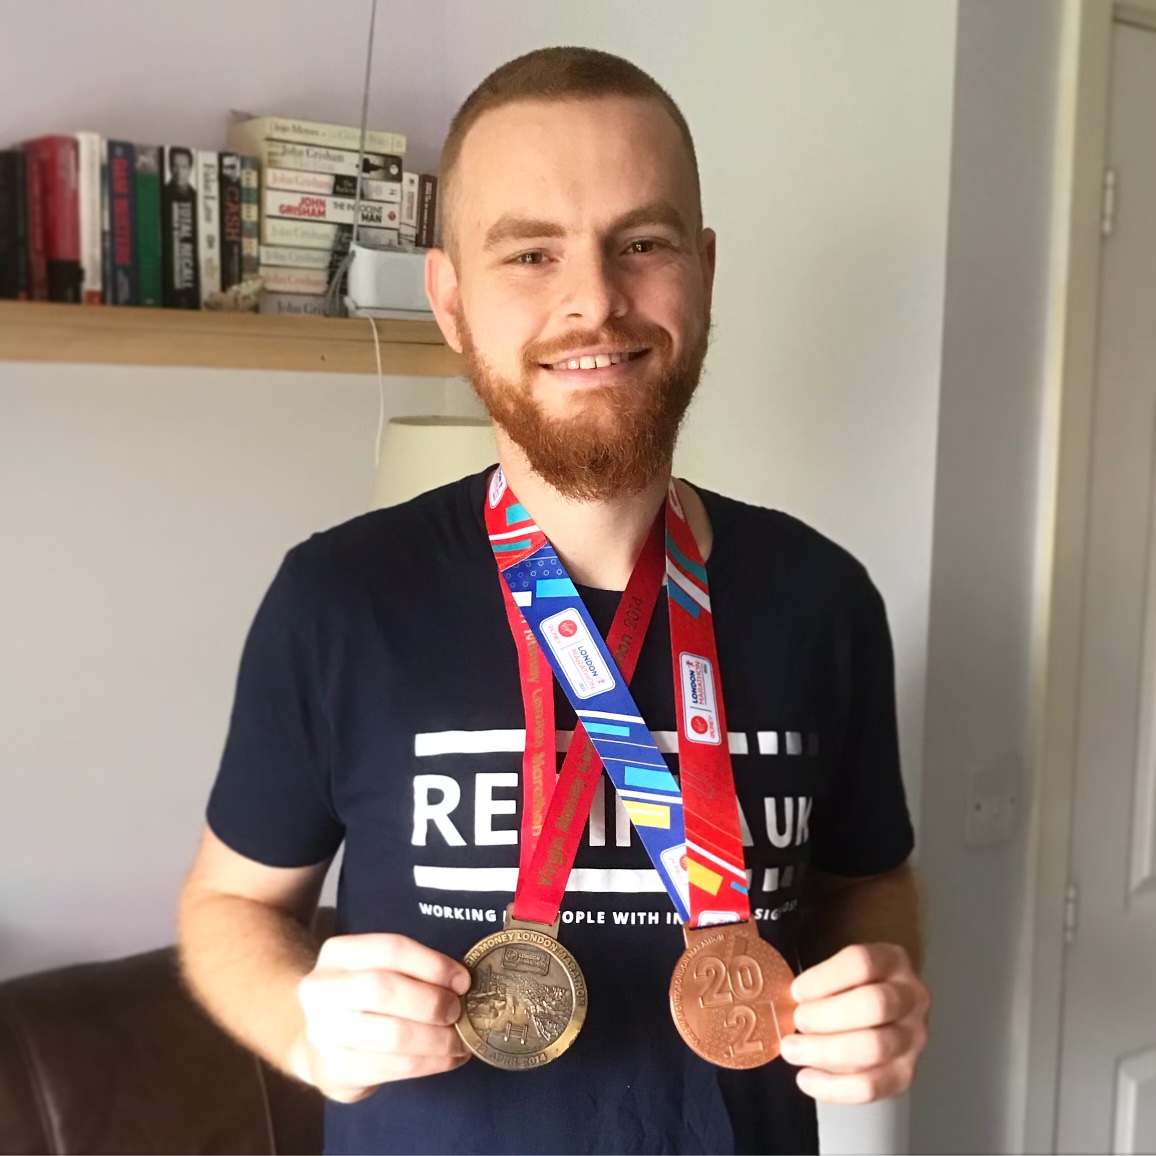 William, smiling directly at the camera. He is wearing a Retina UK tshirt and has two medals hanging around his neck